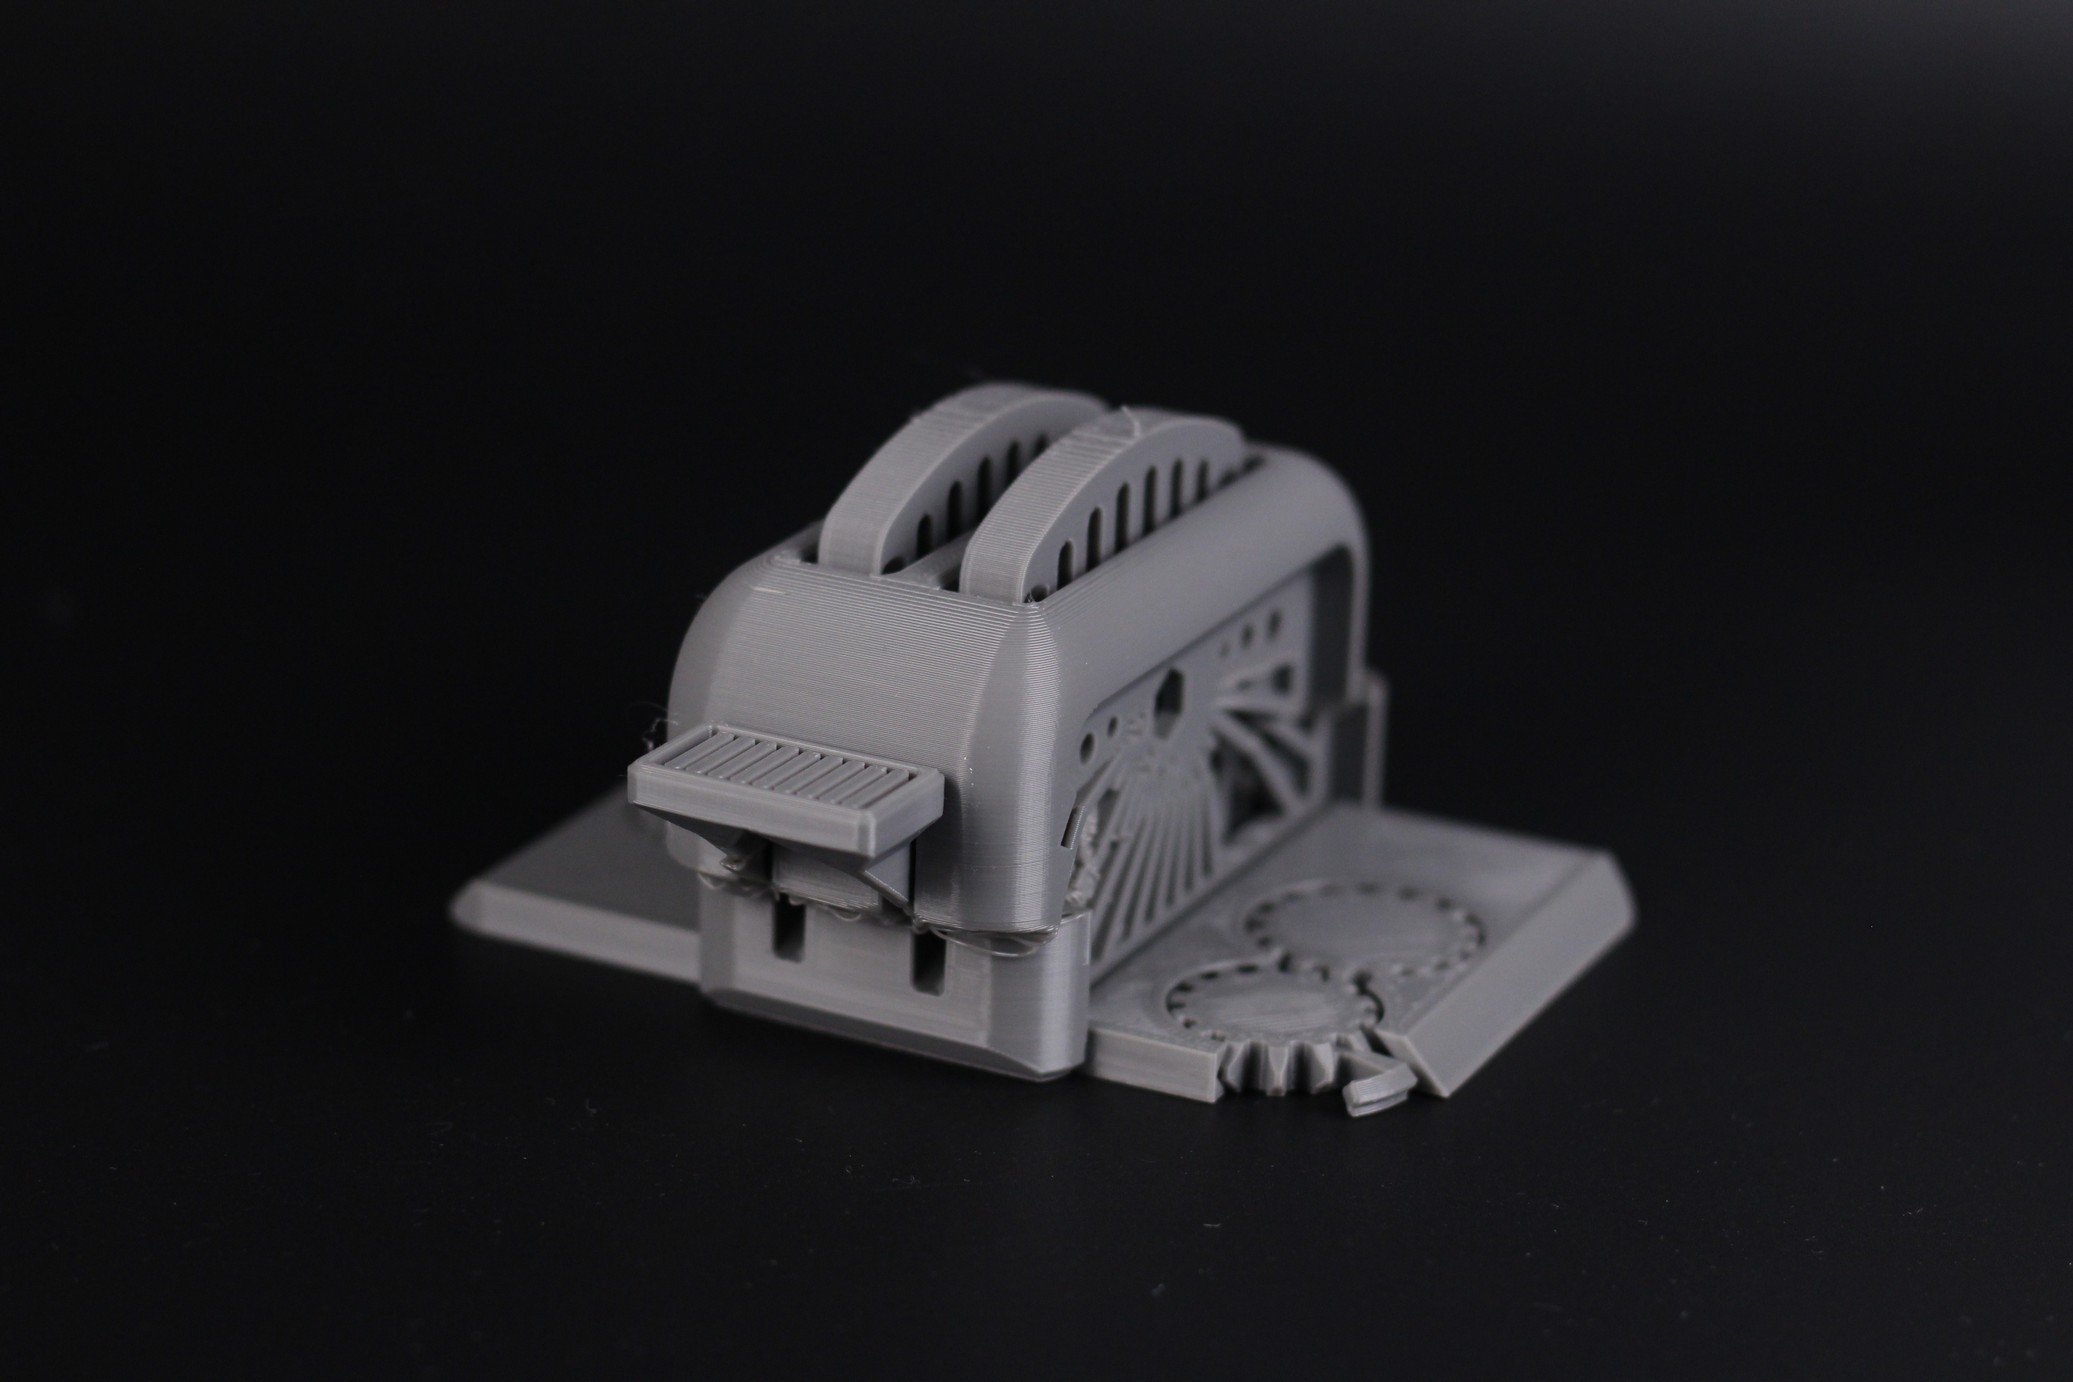 Torture Toaster printed on Anycubic Kobra 3 | Anycubic Kobra Review: The New Budget Standard